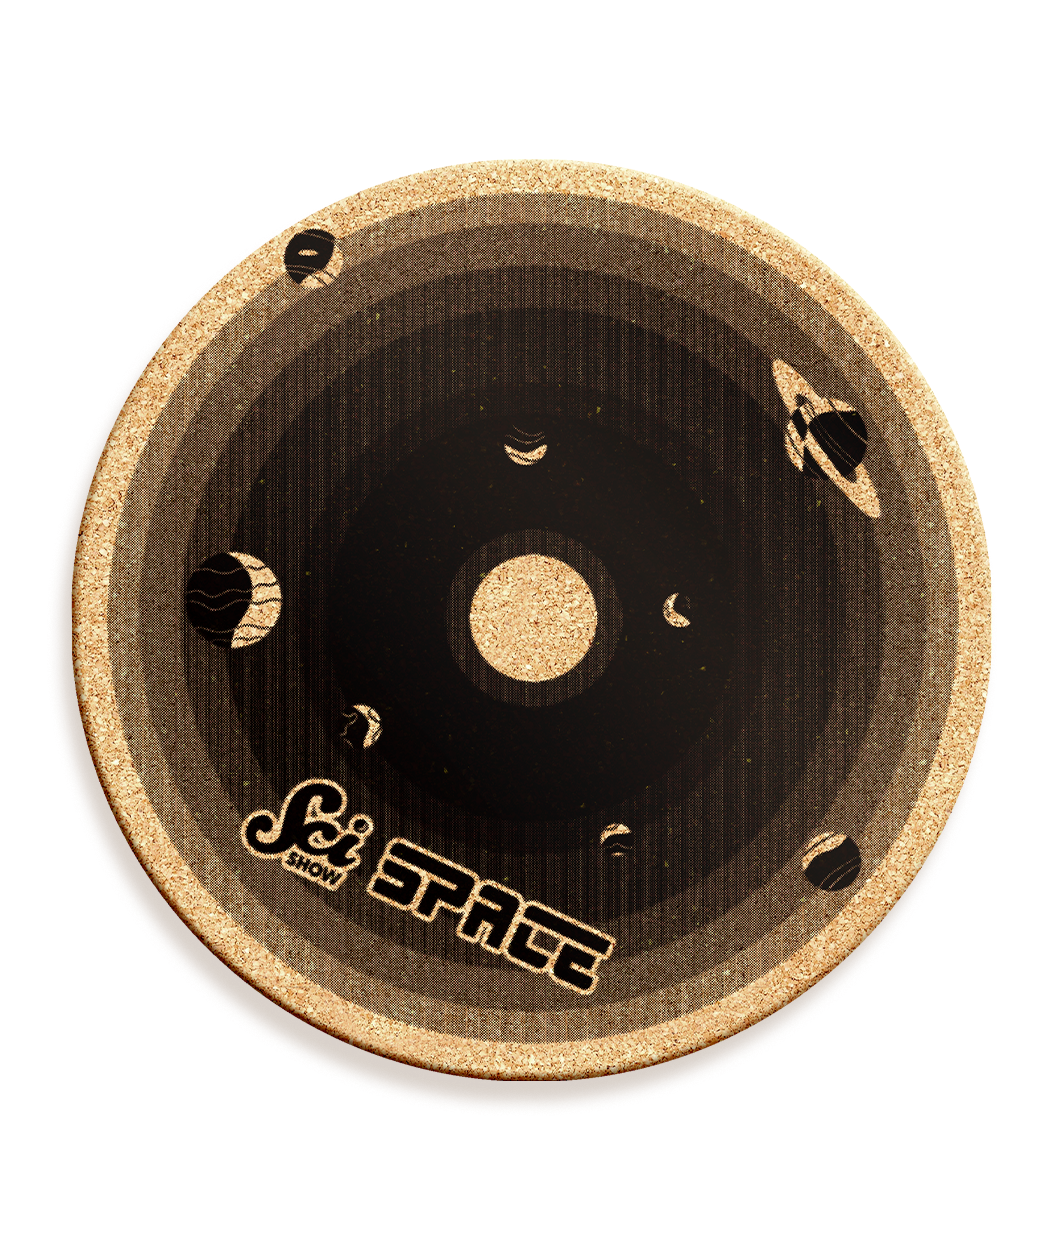 A round cork board with shades of black, showing the different planets. It says "Scishow Space" on the outer edge.